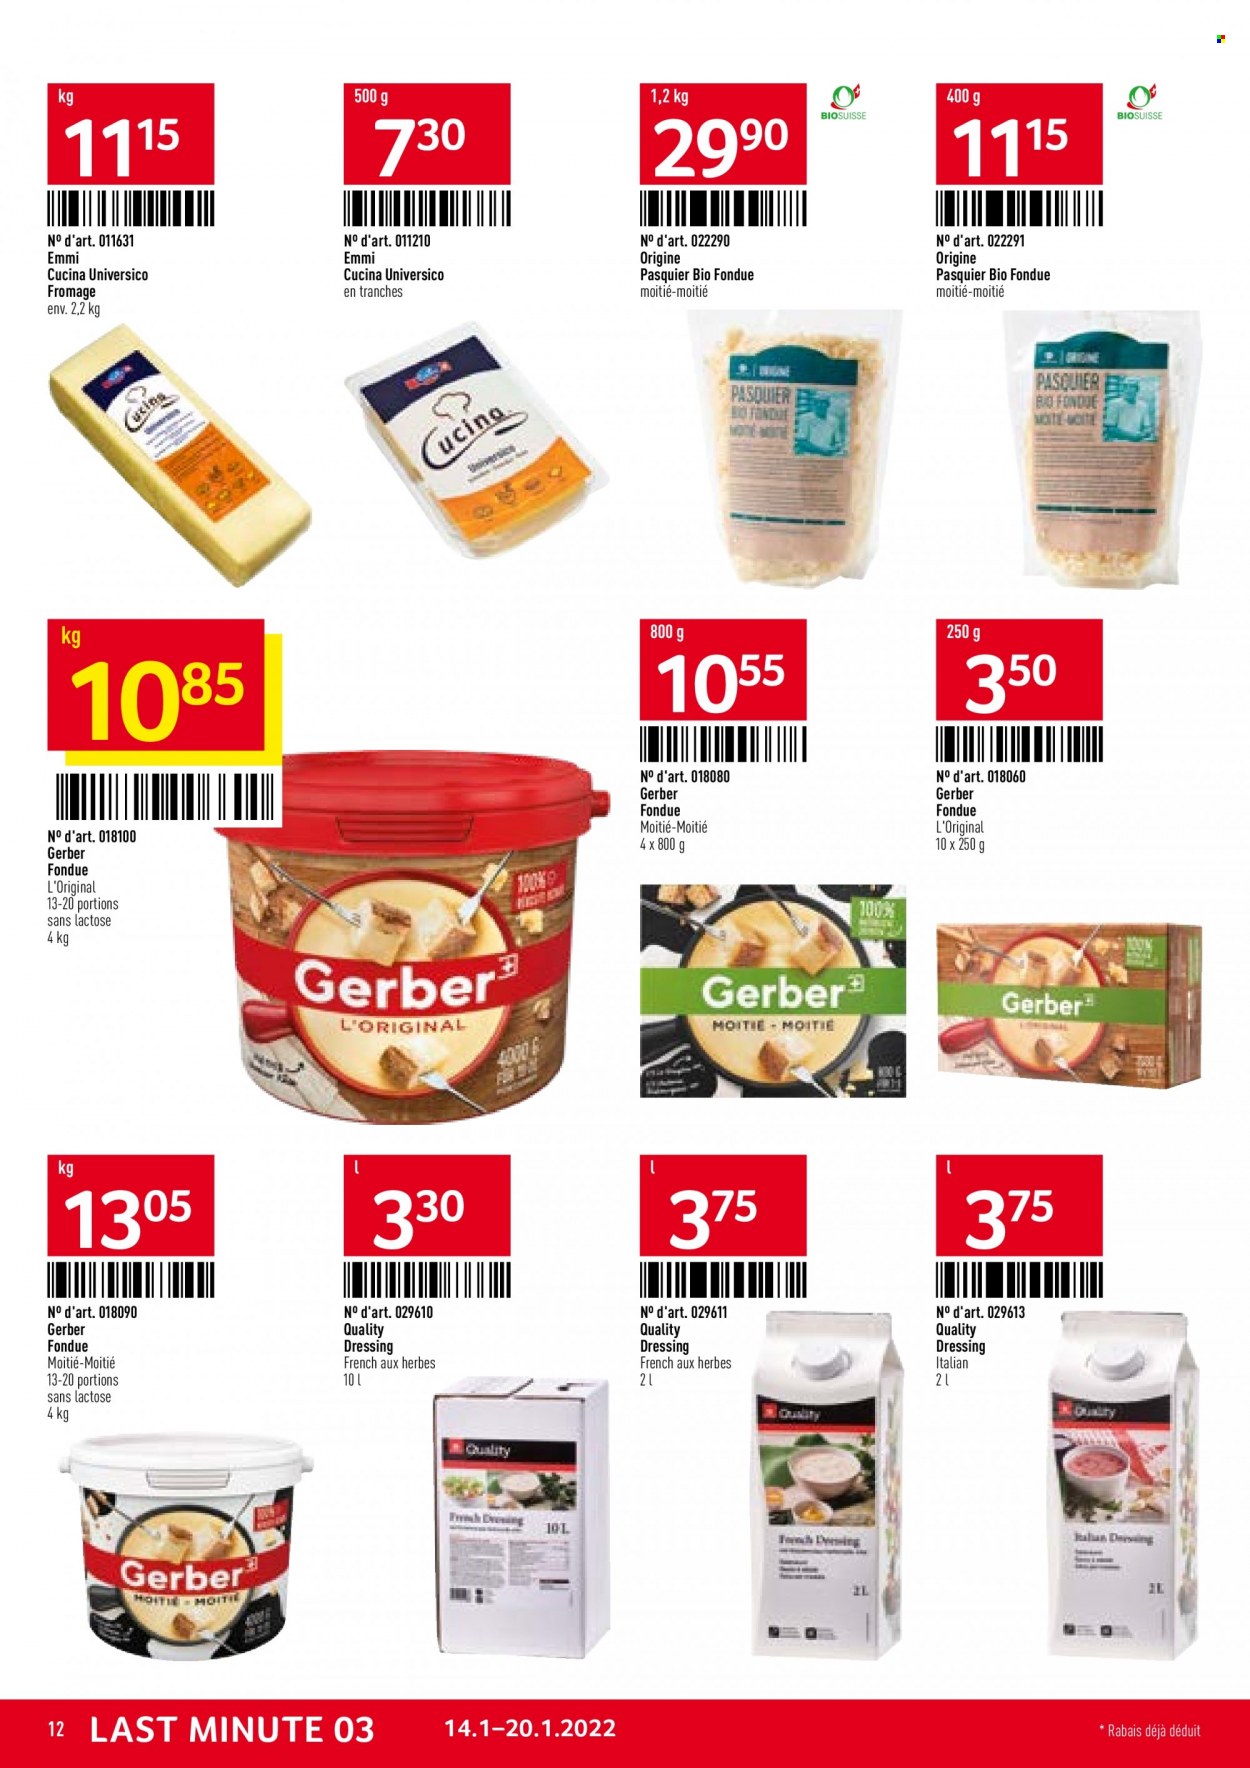 Catalogue TransGourmet - 14.1.2022 - 20.1.2022. Page 12.